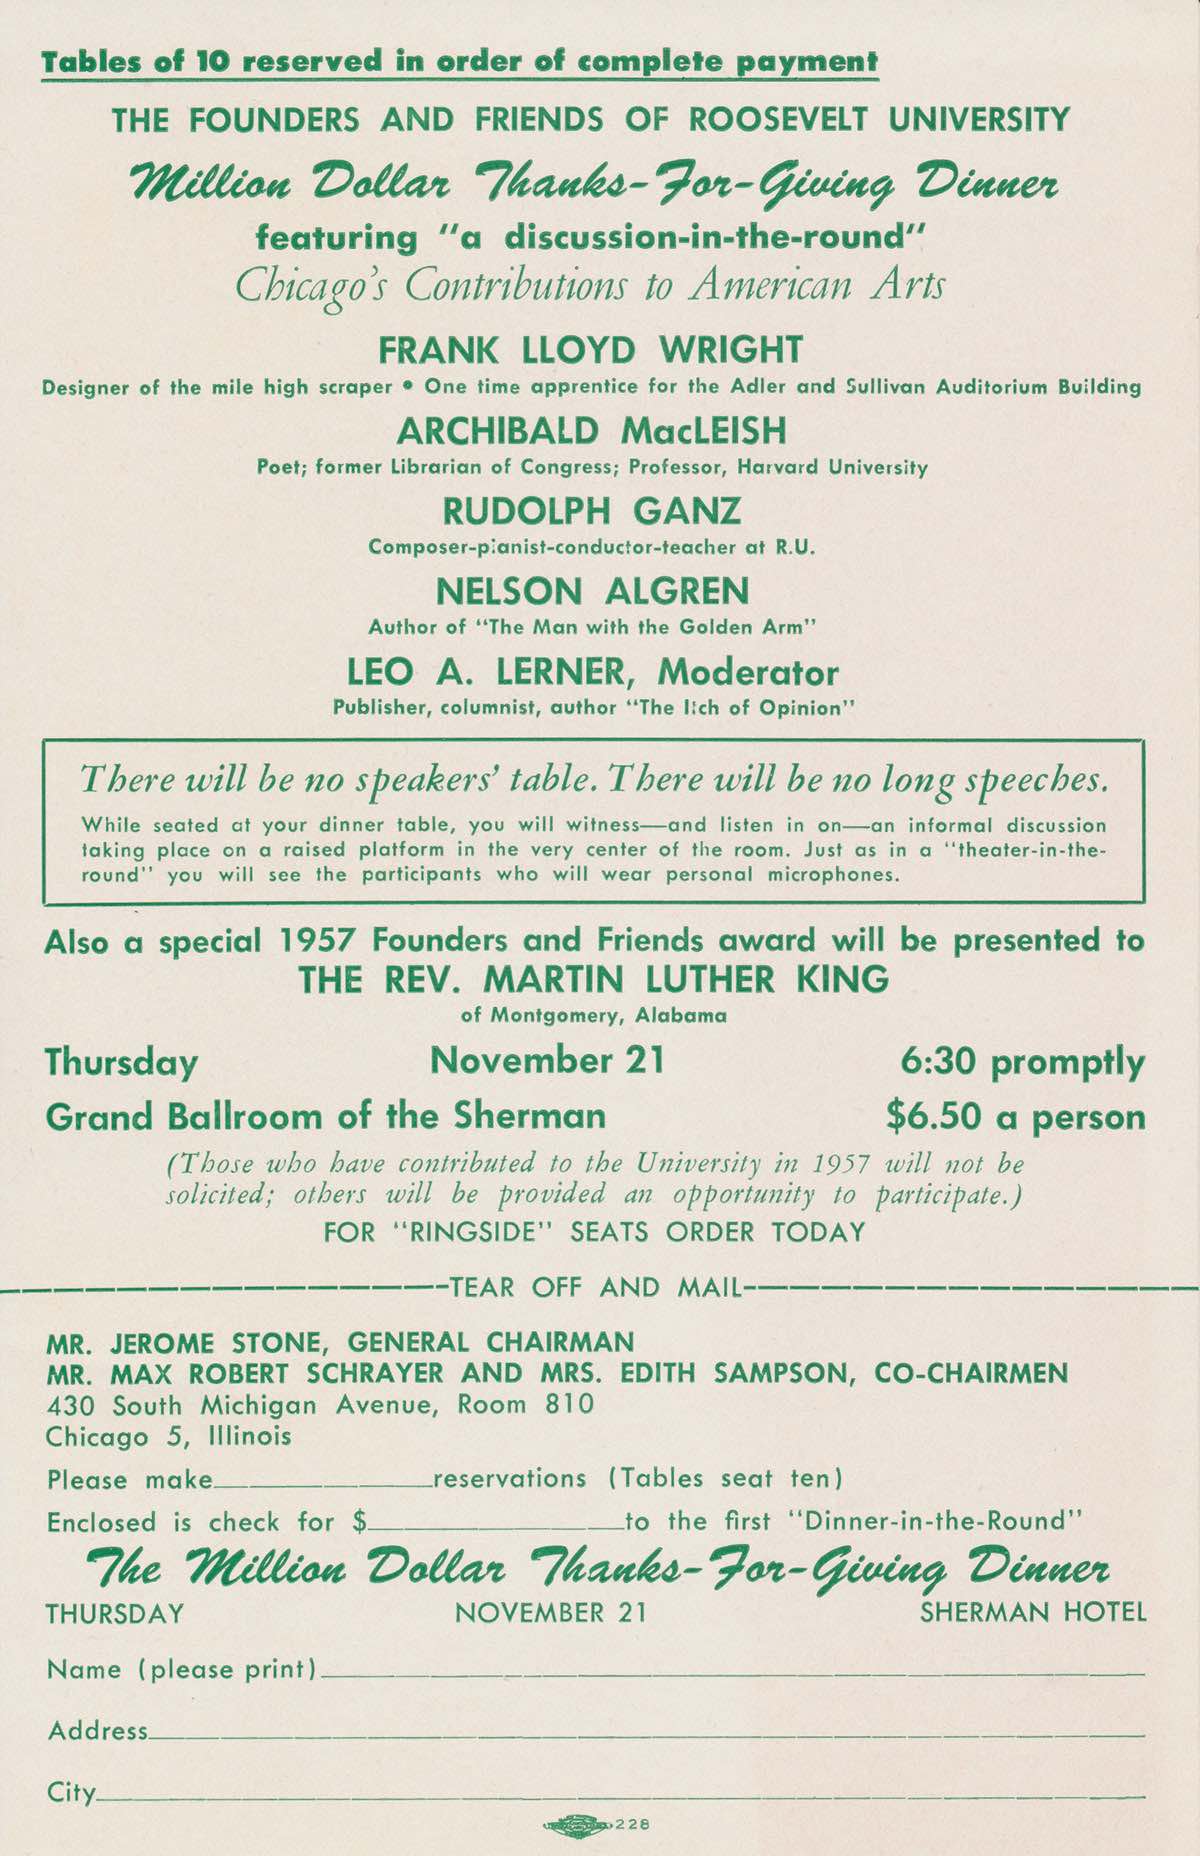 Ad for the 1957 dinner where Martin Luther King, Jr. was presented with the Roosevelt University Founders and Friends Award.